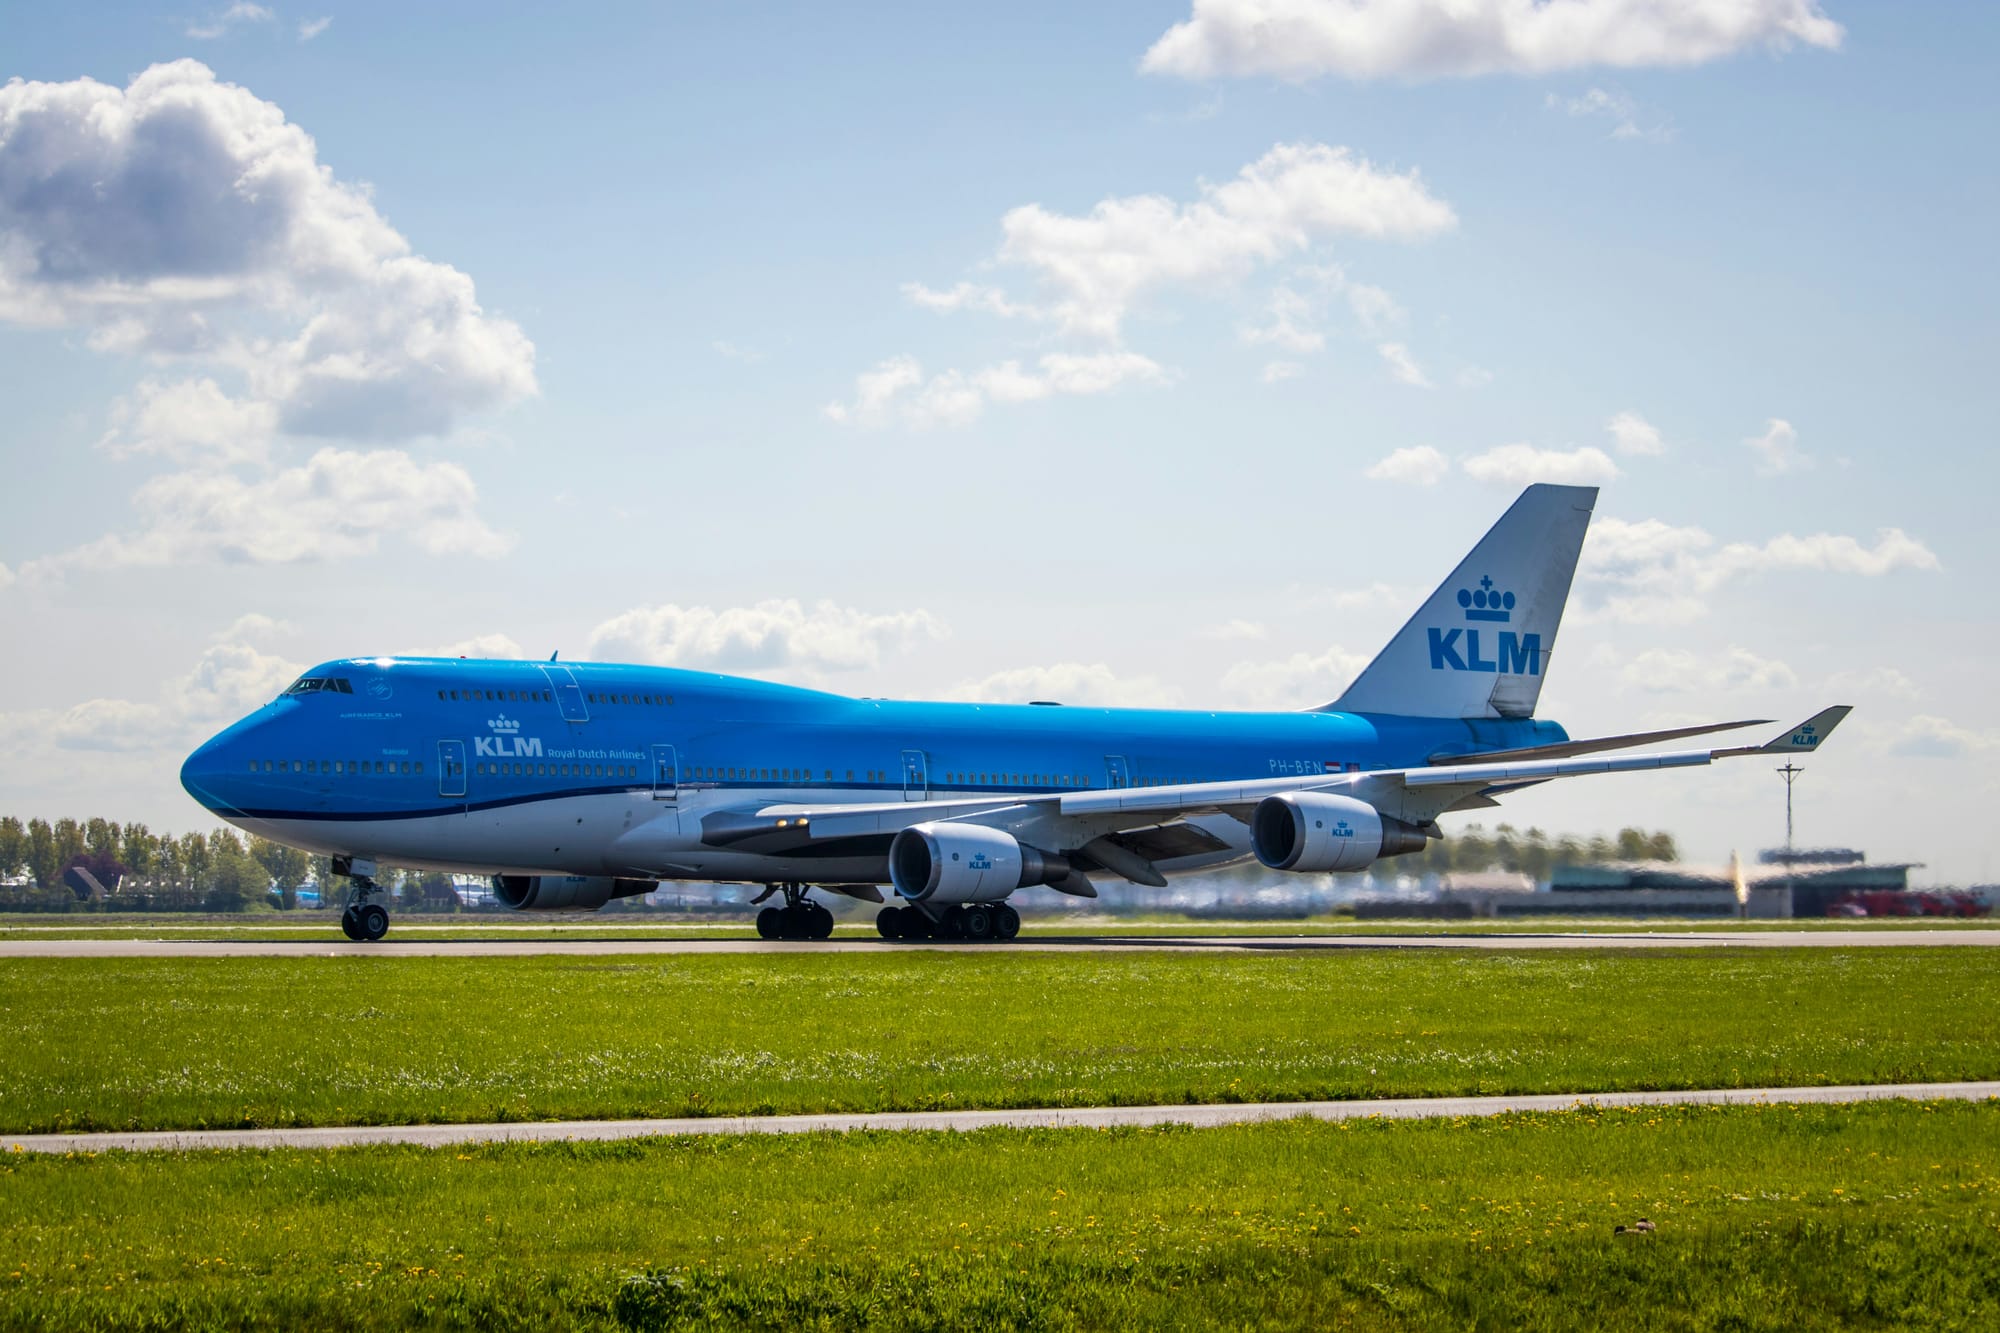 The Queen of the Skies No More: Why the Boeing 747 Era Is Over